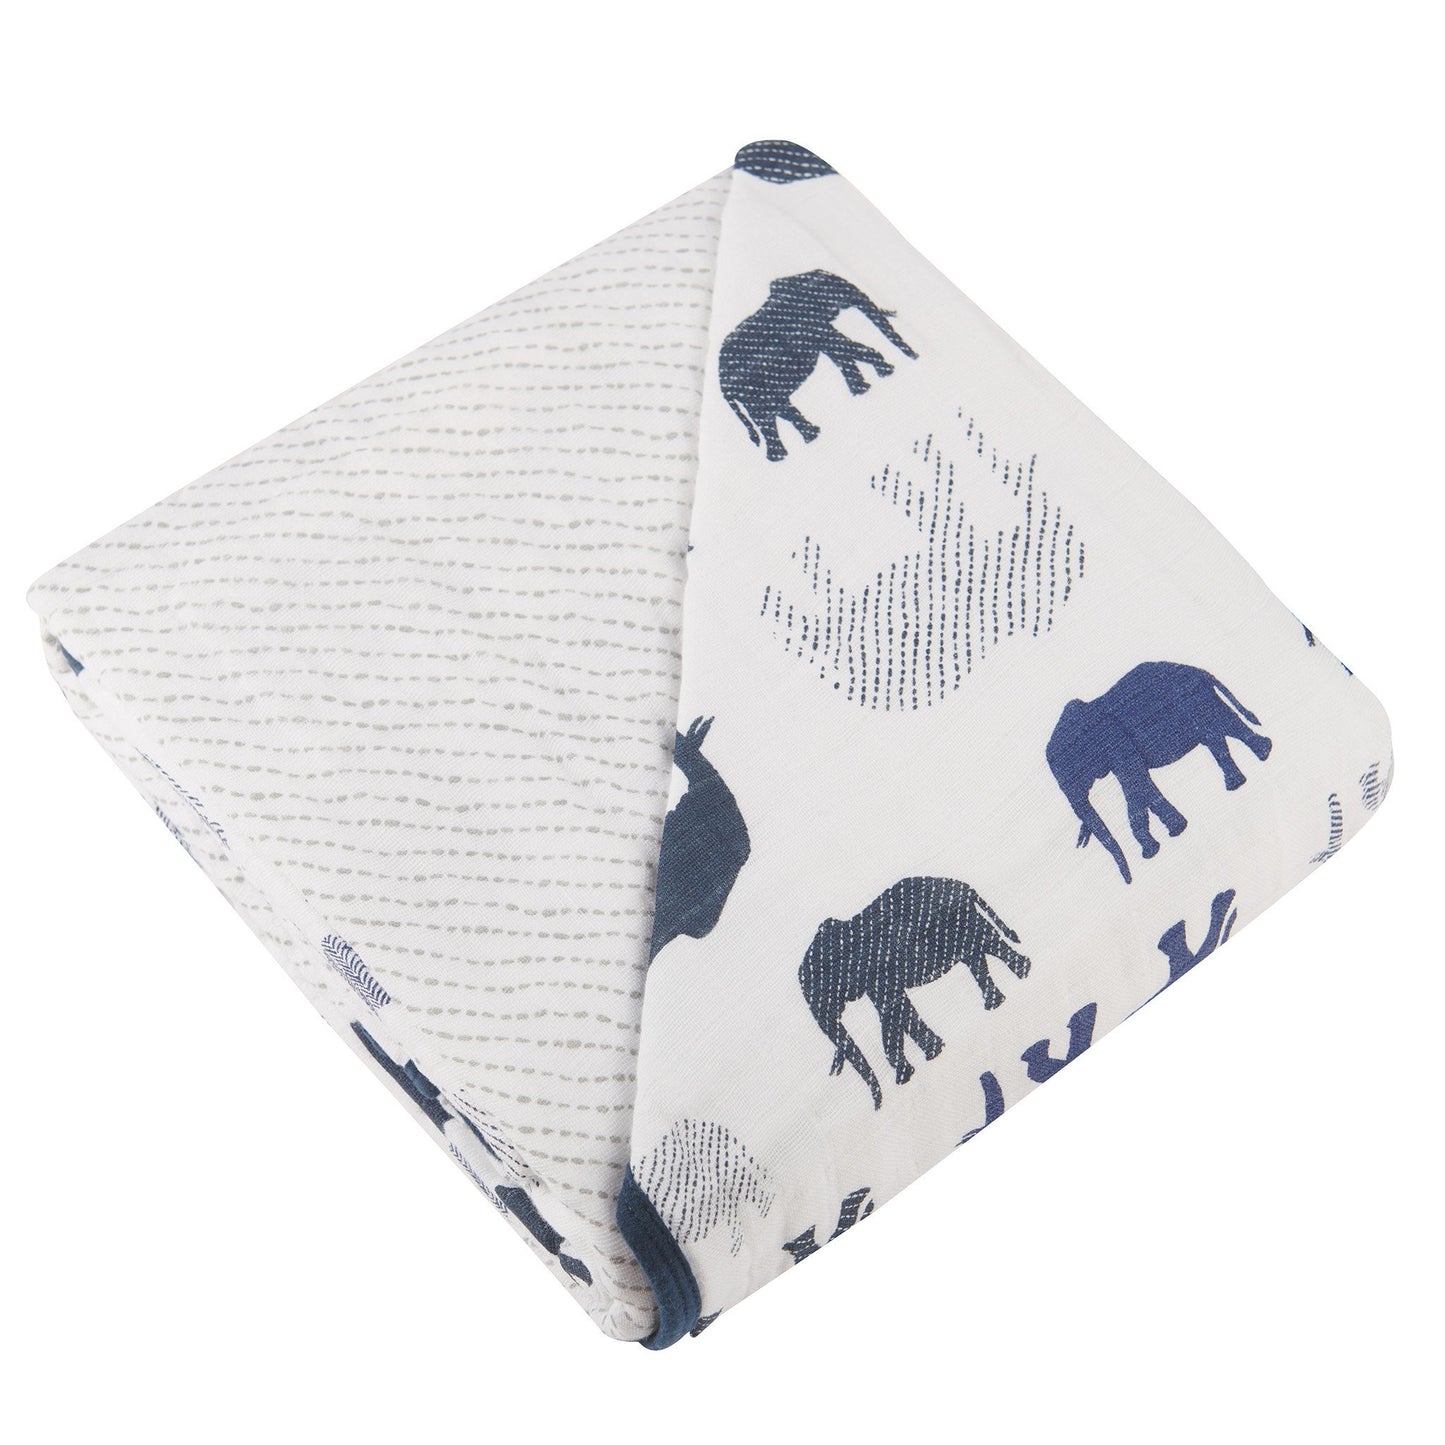 Blue Elephants and Spotted Wave Newcastle Blanket